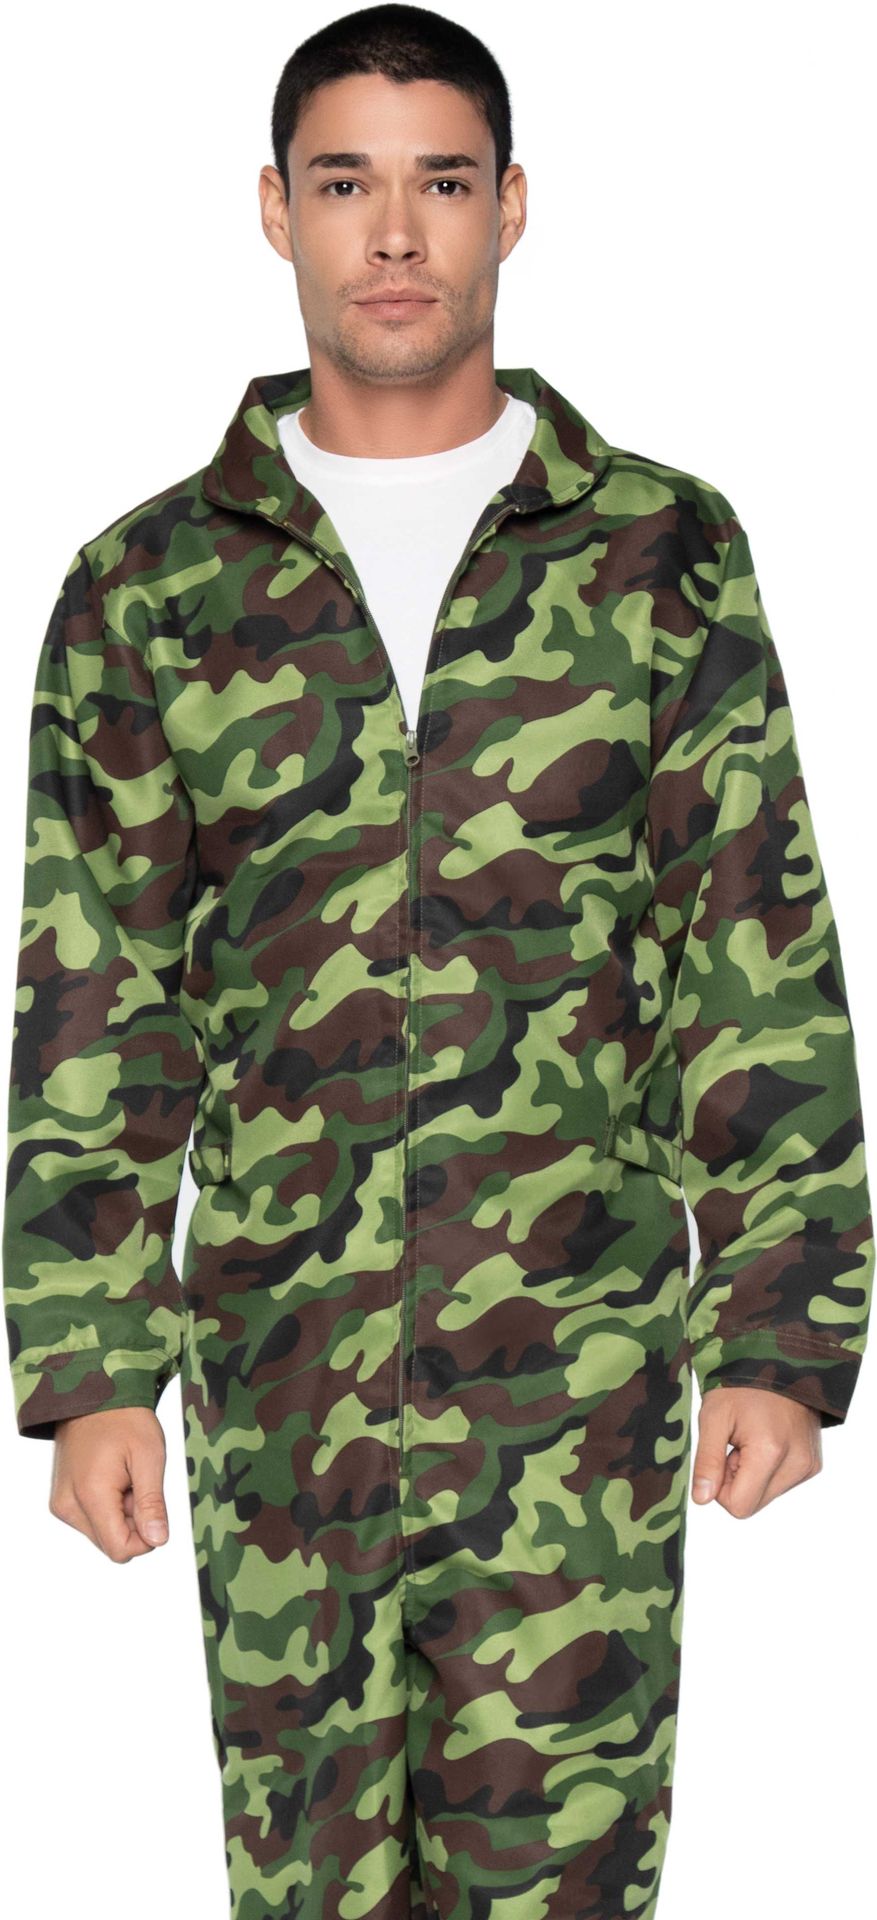 Basic camouflage overall